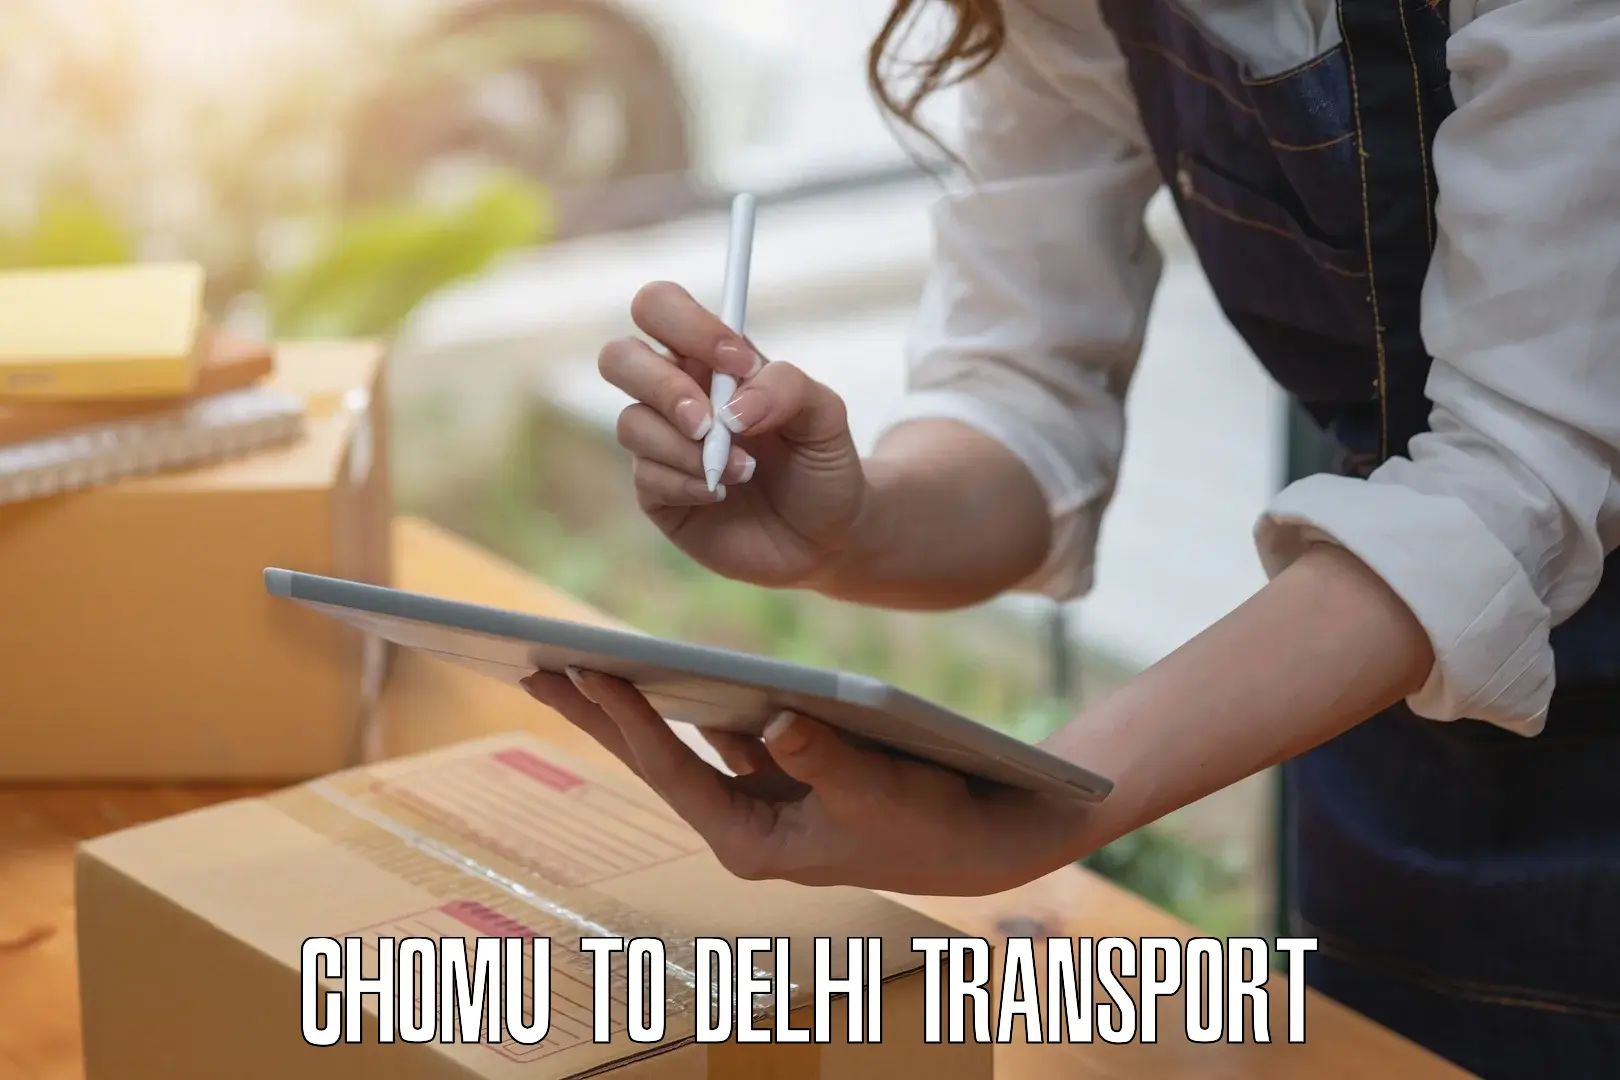 Container transport service Chomu to University of Delhi